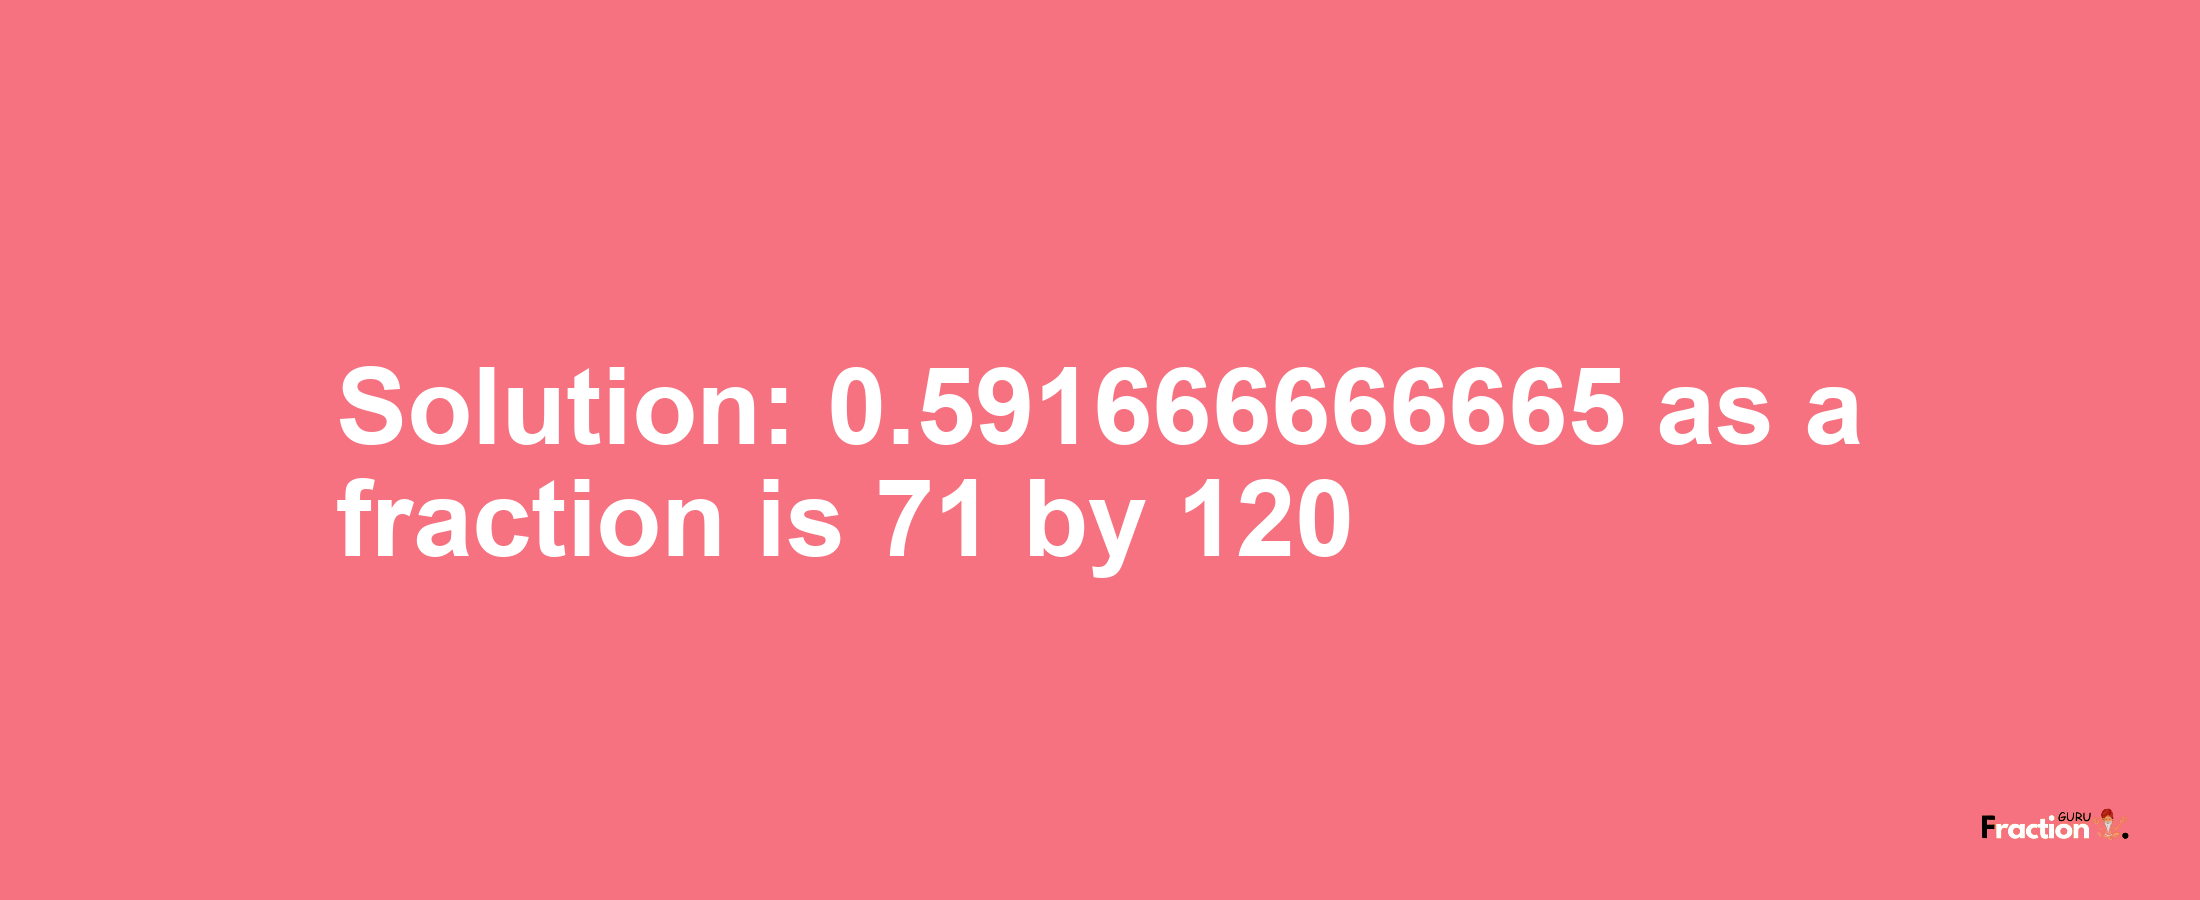 Solution:0.591666666665 as a fraction is 71/120